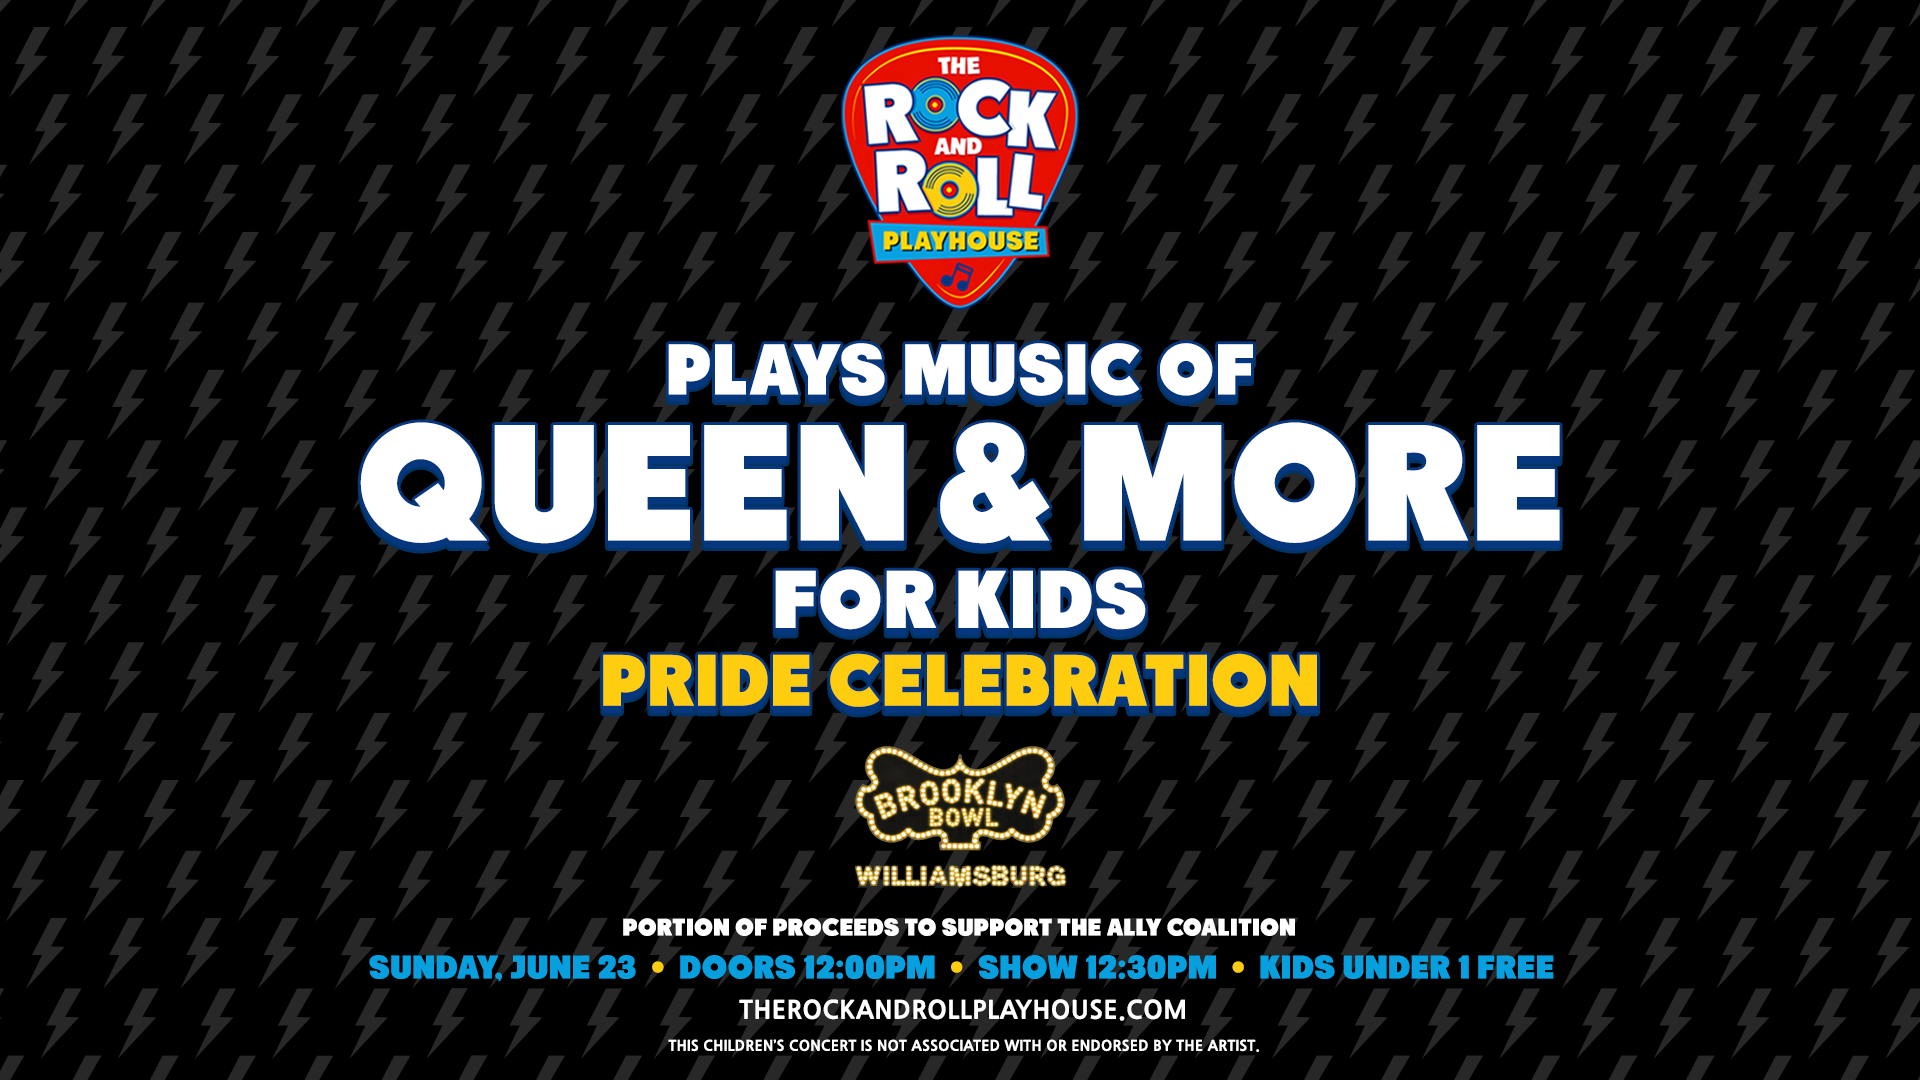 More Info for The Rock and Roll Playhouse plays the Music of Queen + More for Kids